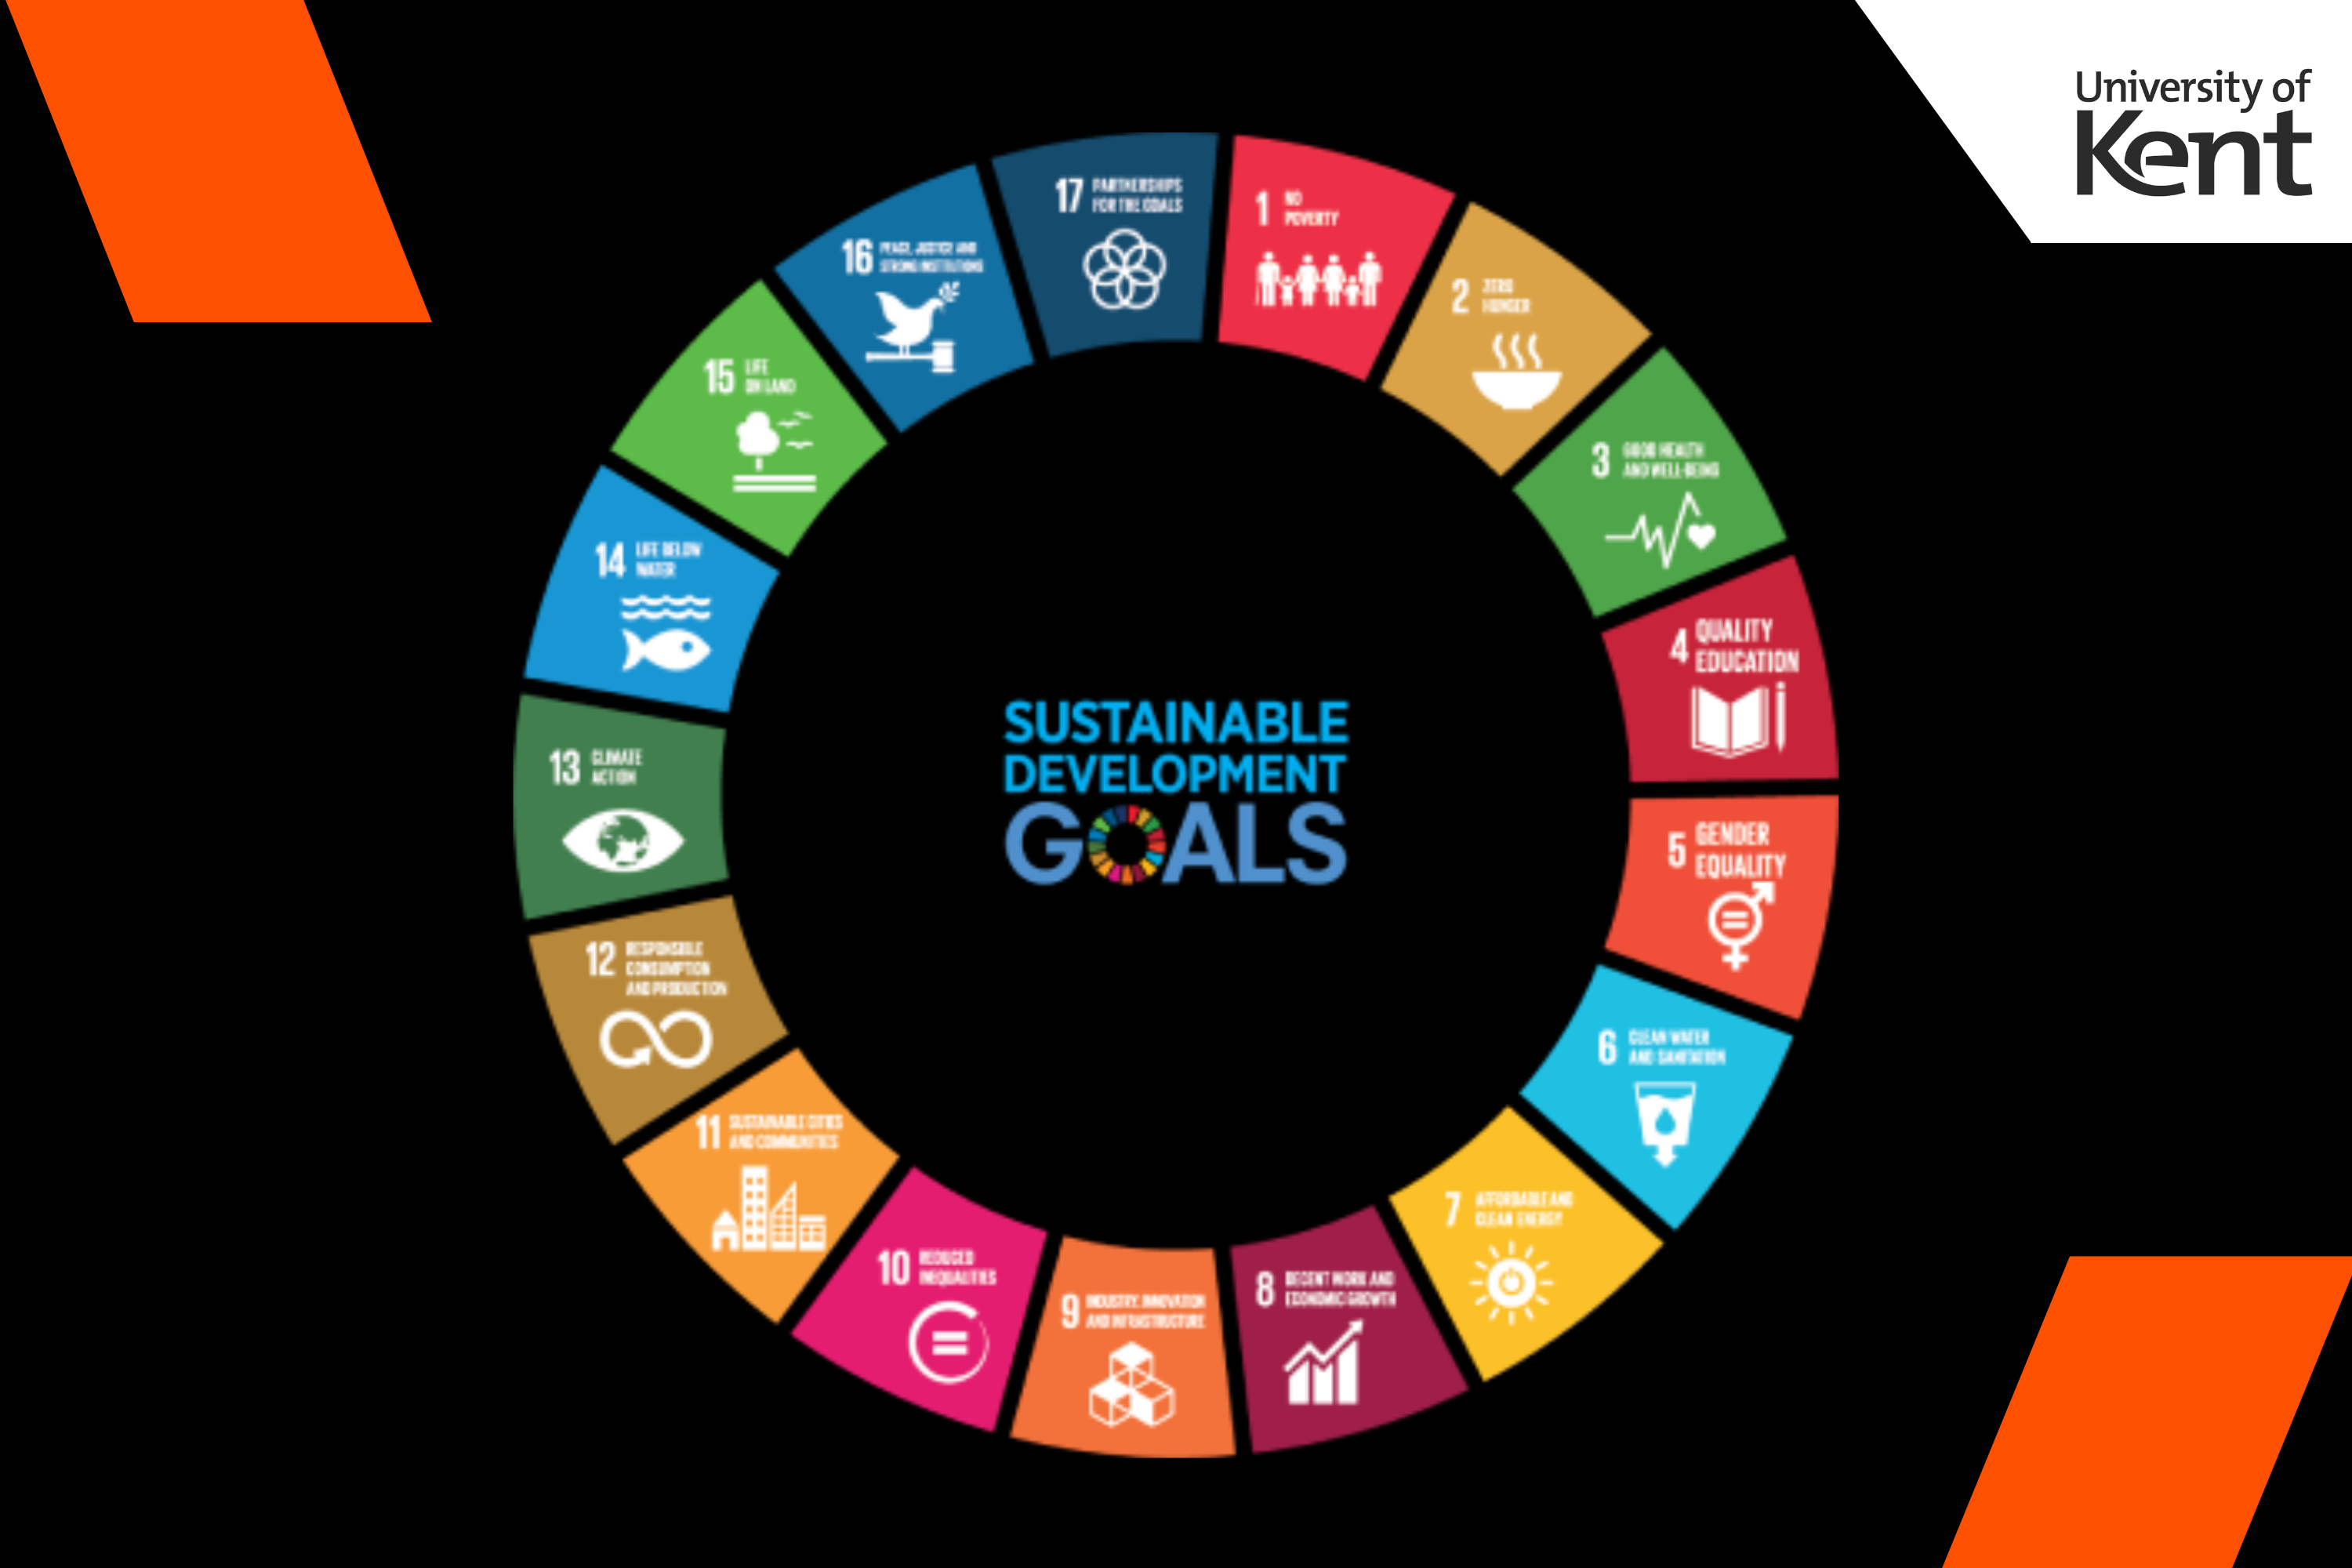 picture of the sustainable development goals mutli colour wheel on a black background